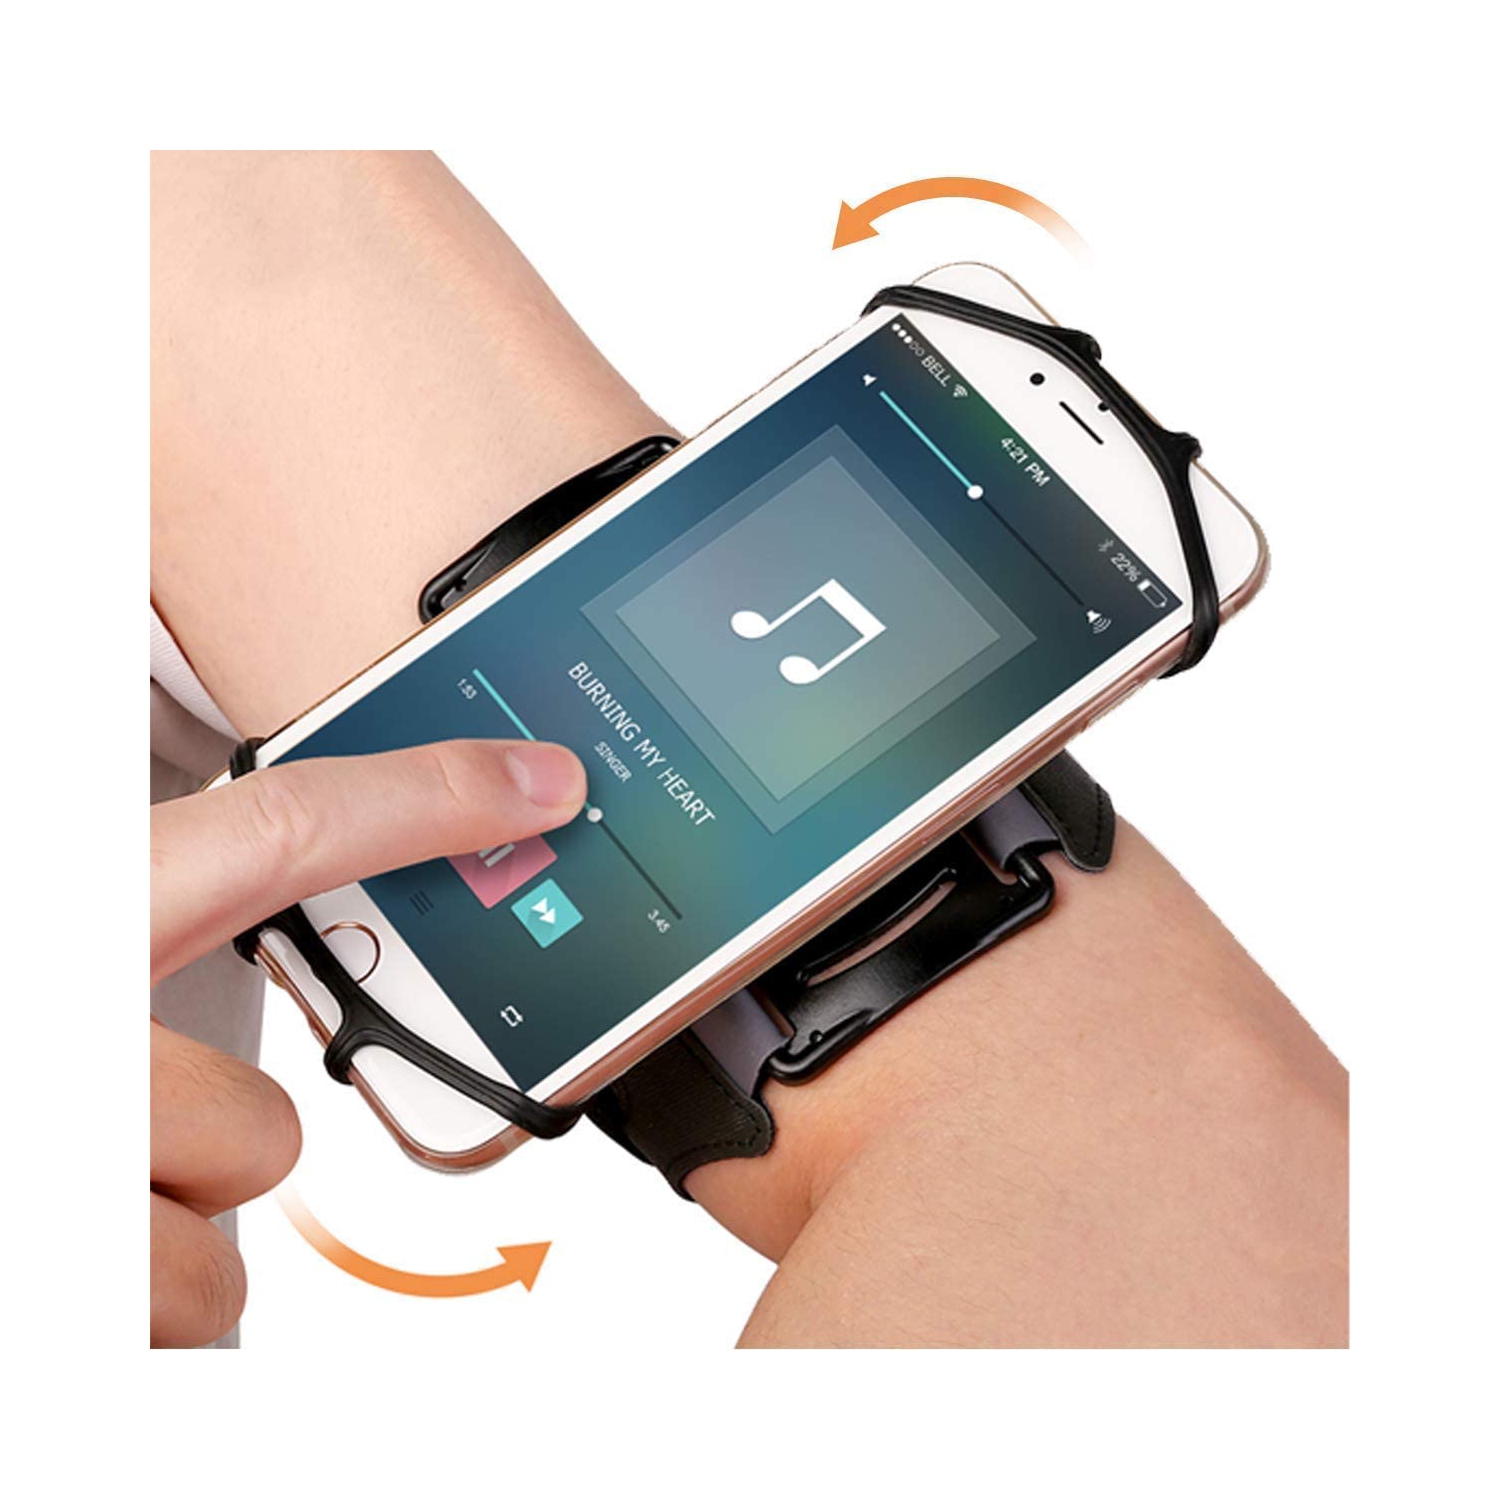 180° Rotatable Armband / Wristband Phone Holder for Running Hiking Biking- Universal Size for iPhone X 8 8 Plus